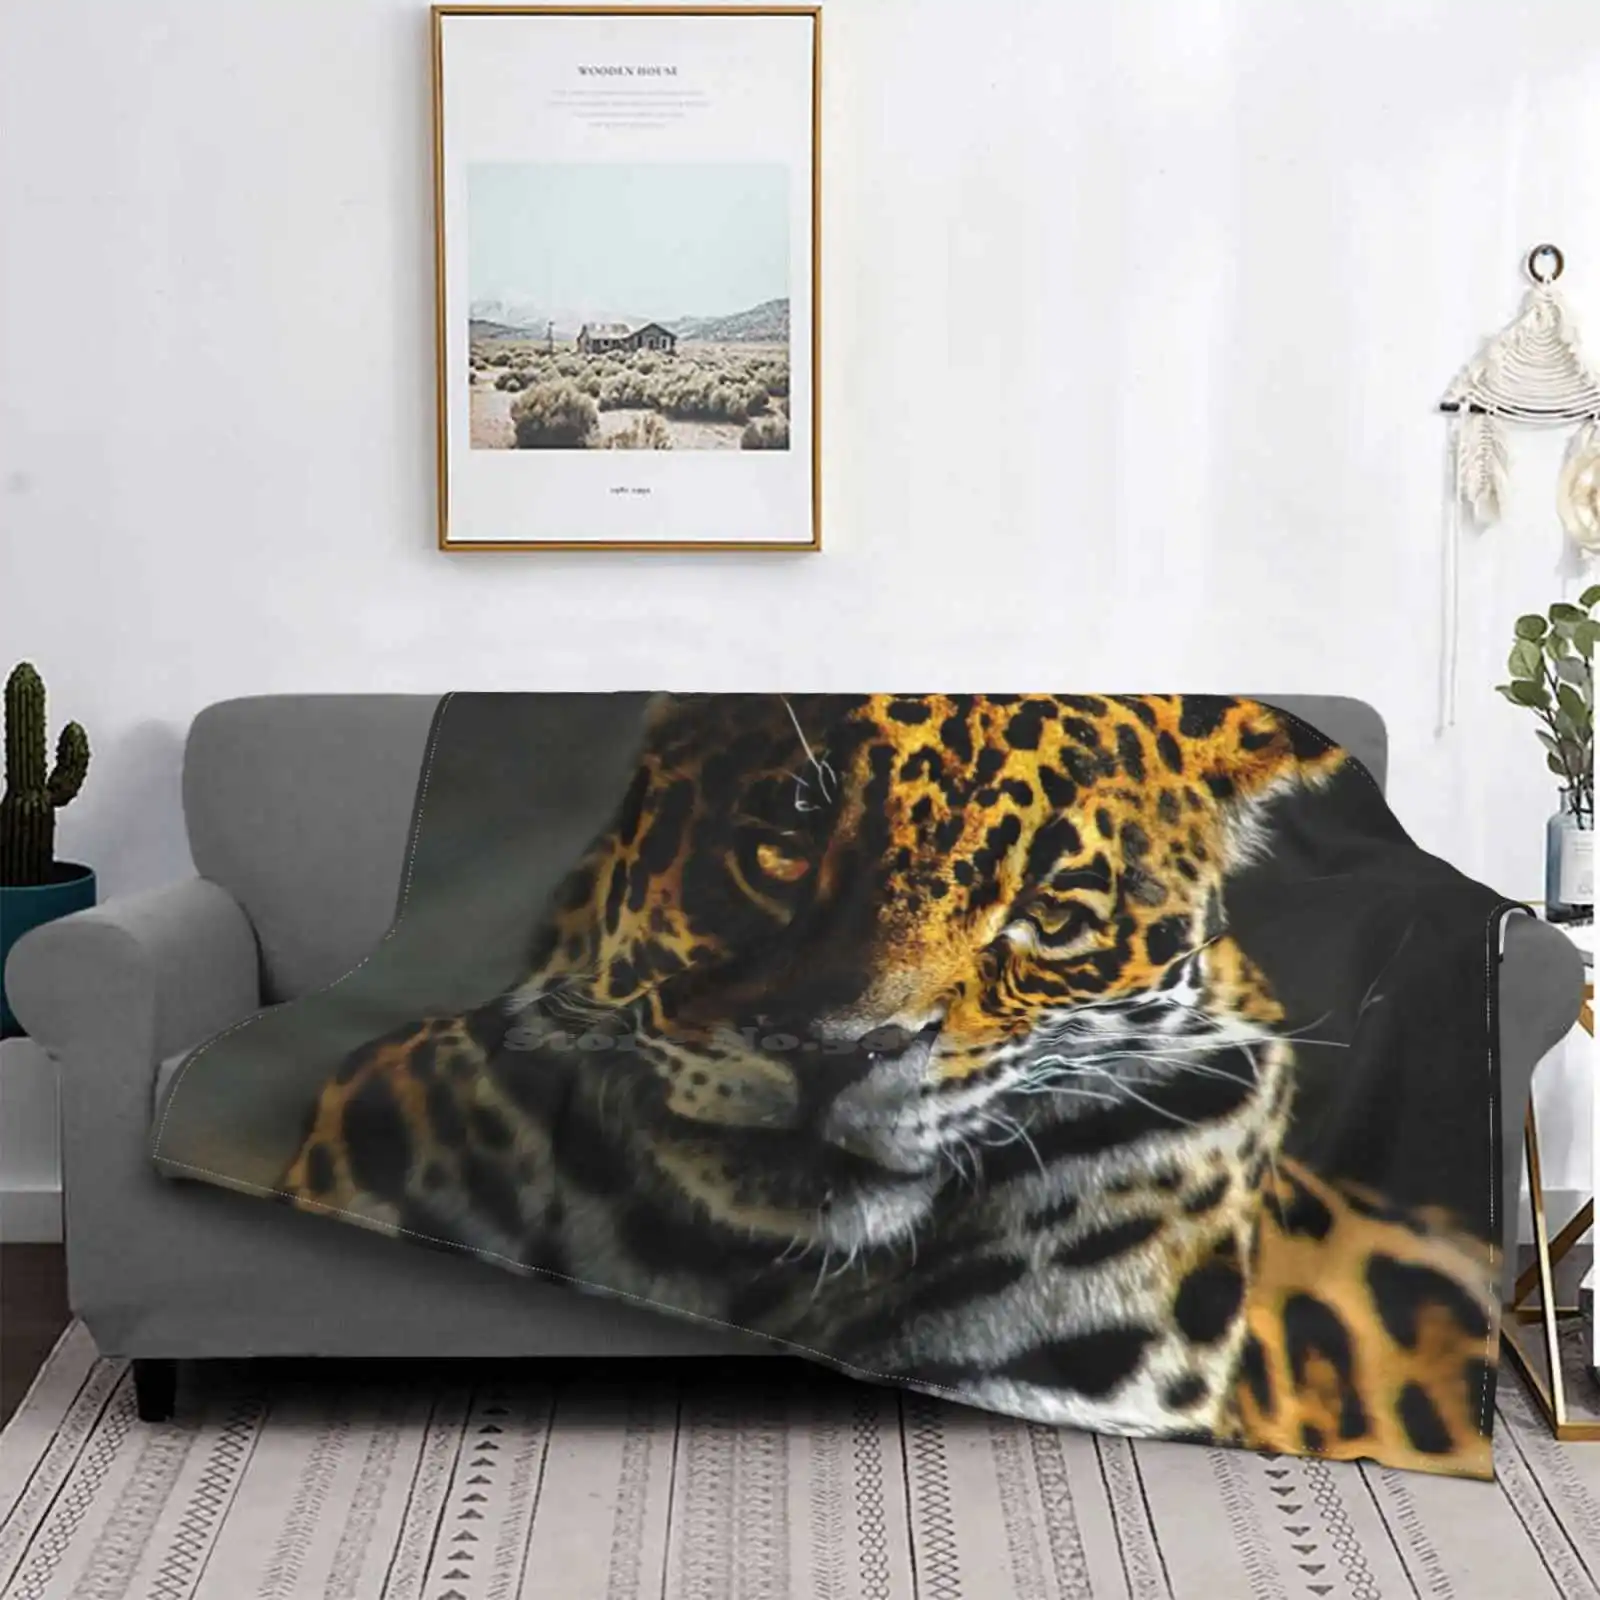 

The Gym Enthusiast Hot Sale Printing High Qiality Warm Flannel Blanket Tiger Leopard Gym Workout Lift Power Animals Fit Athletic